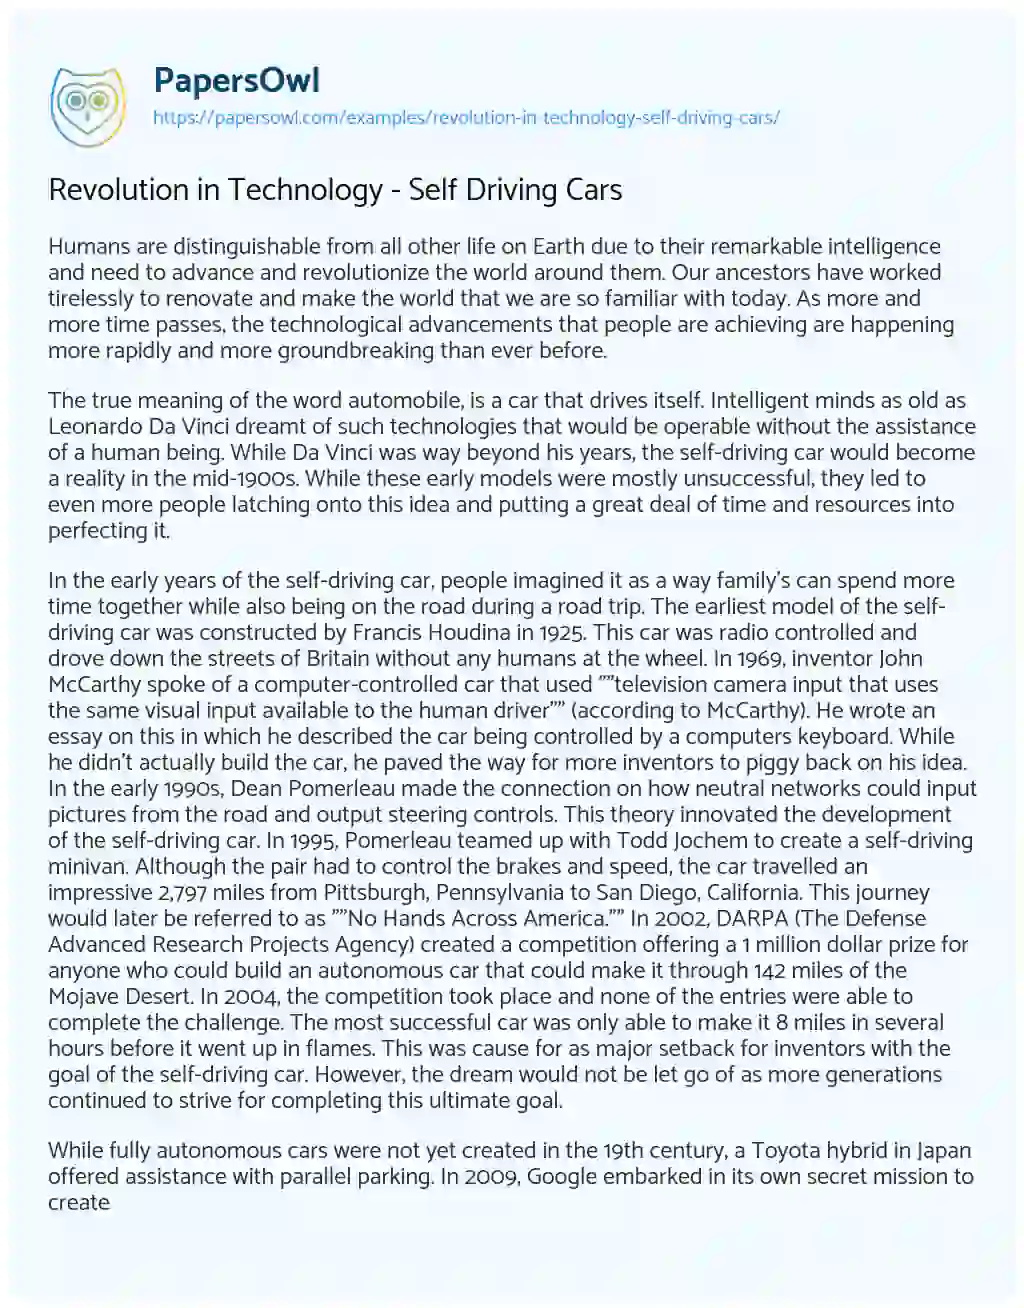 Essay on Revolution in Technology – Self Driving Cars